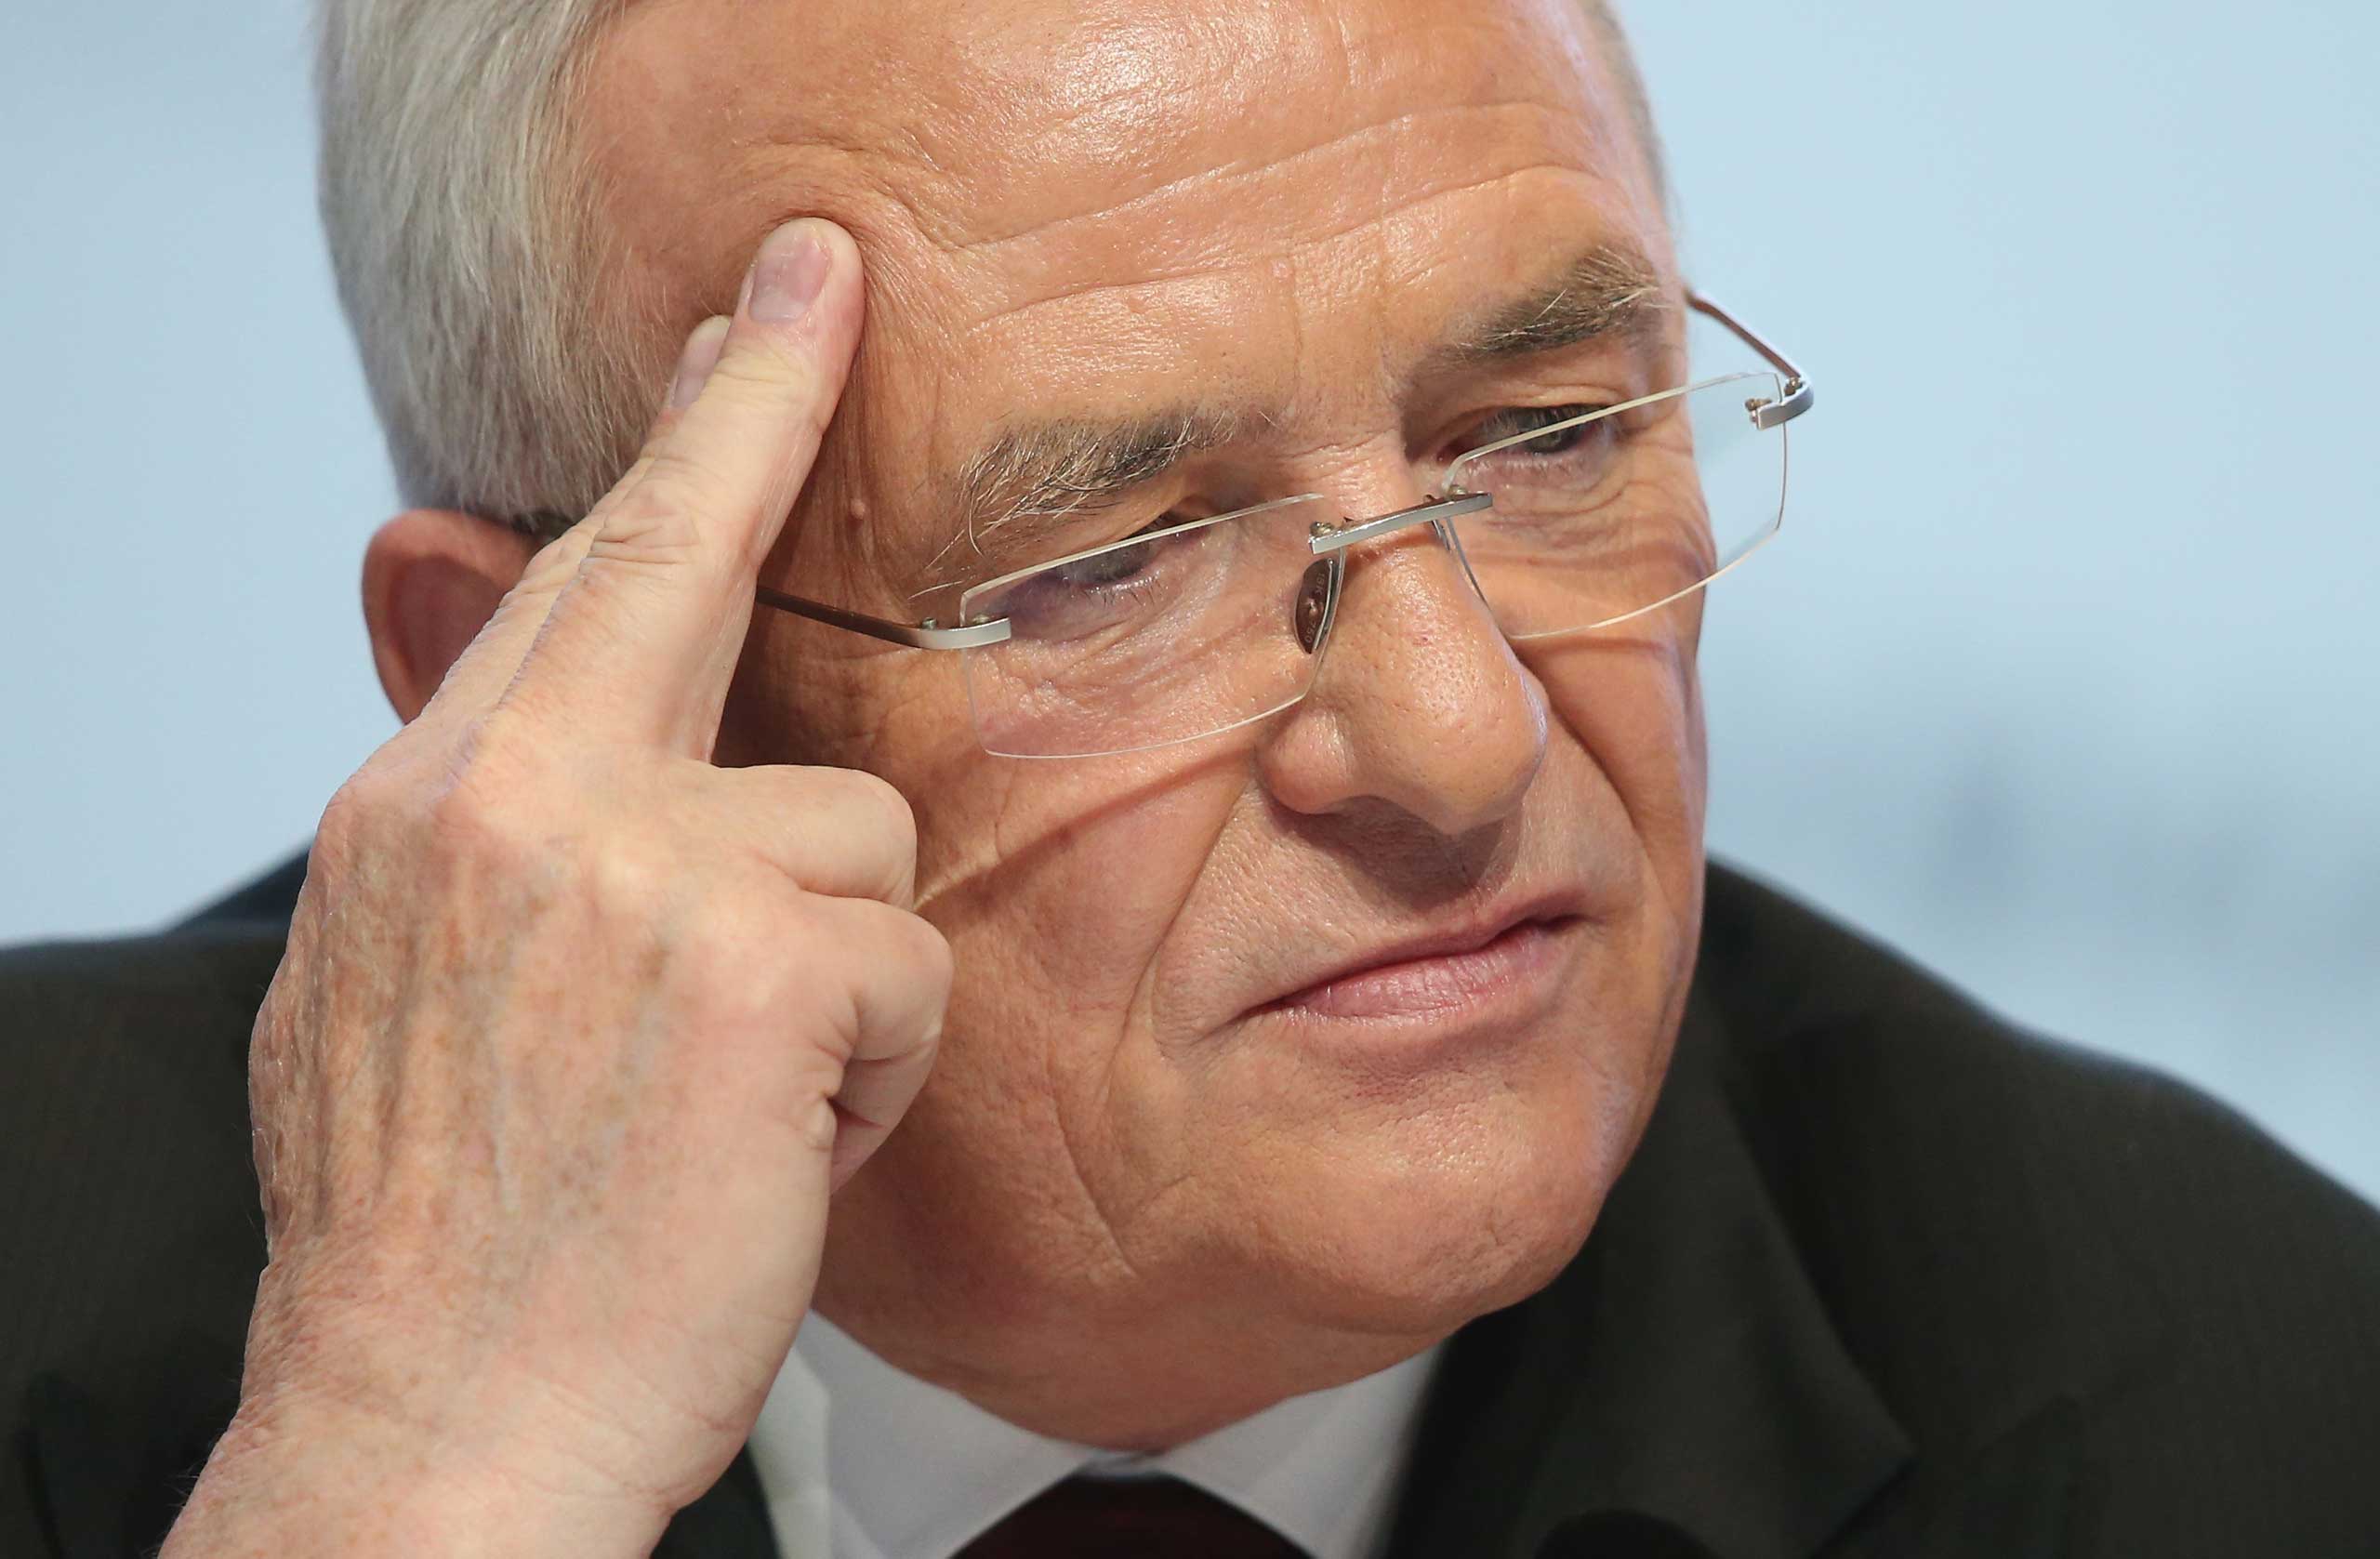 Volkswagen CEO Martin Winterkorn attends the company's annual press conference on March 13, 2014 in Wolfsburg, Germany. (Sean Gallup—Getty Images)